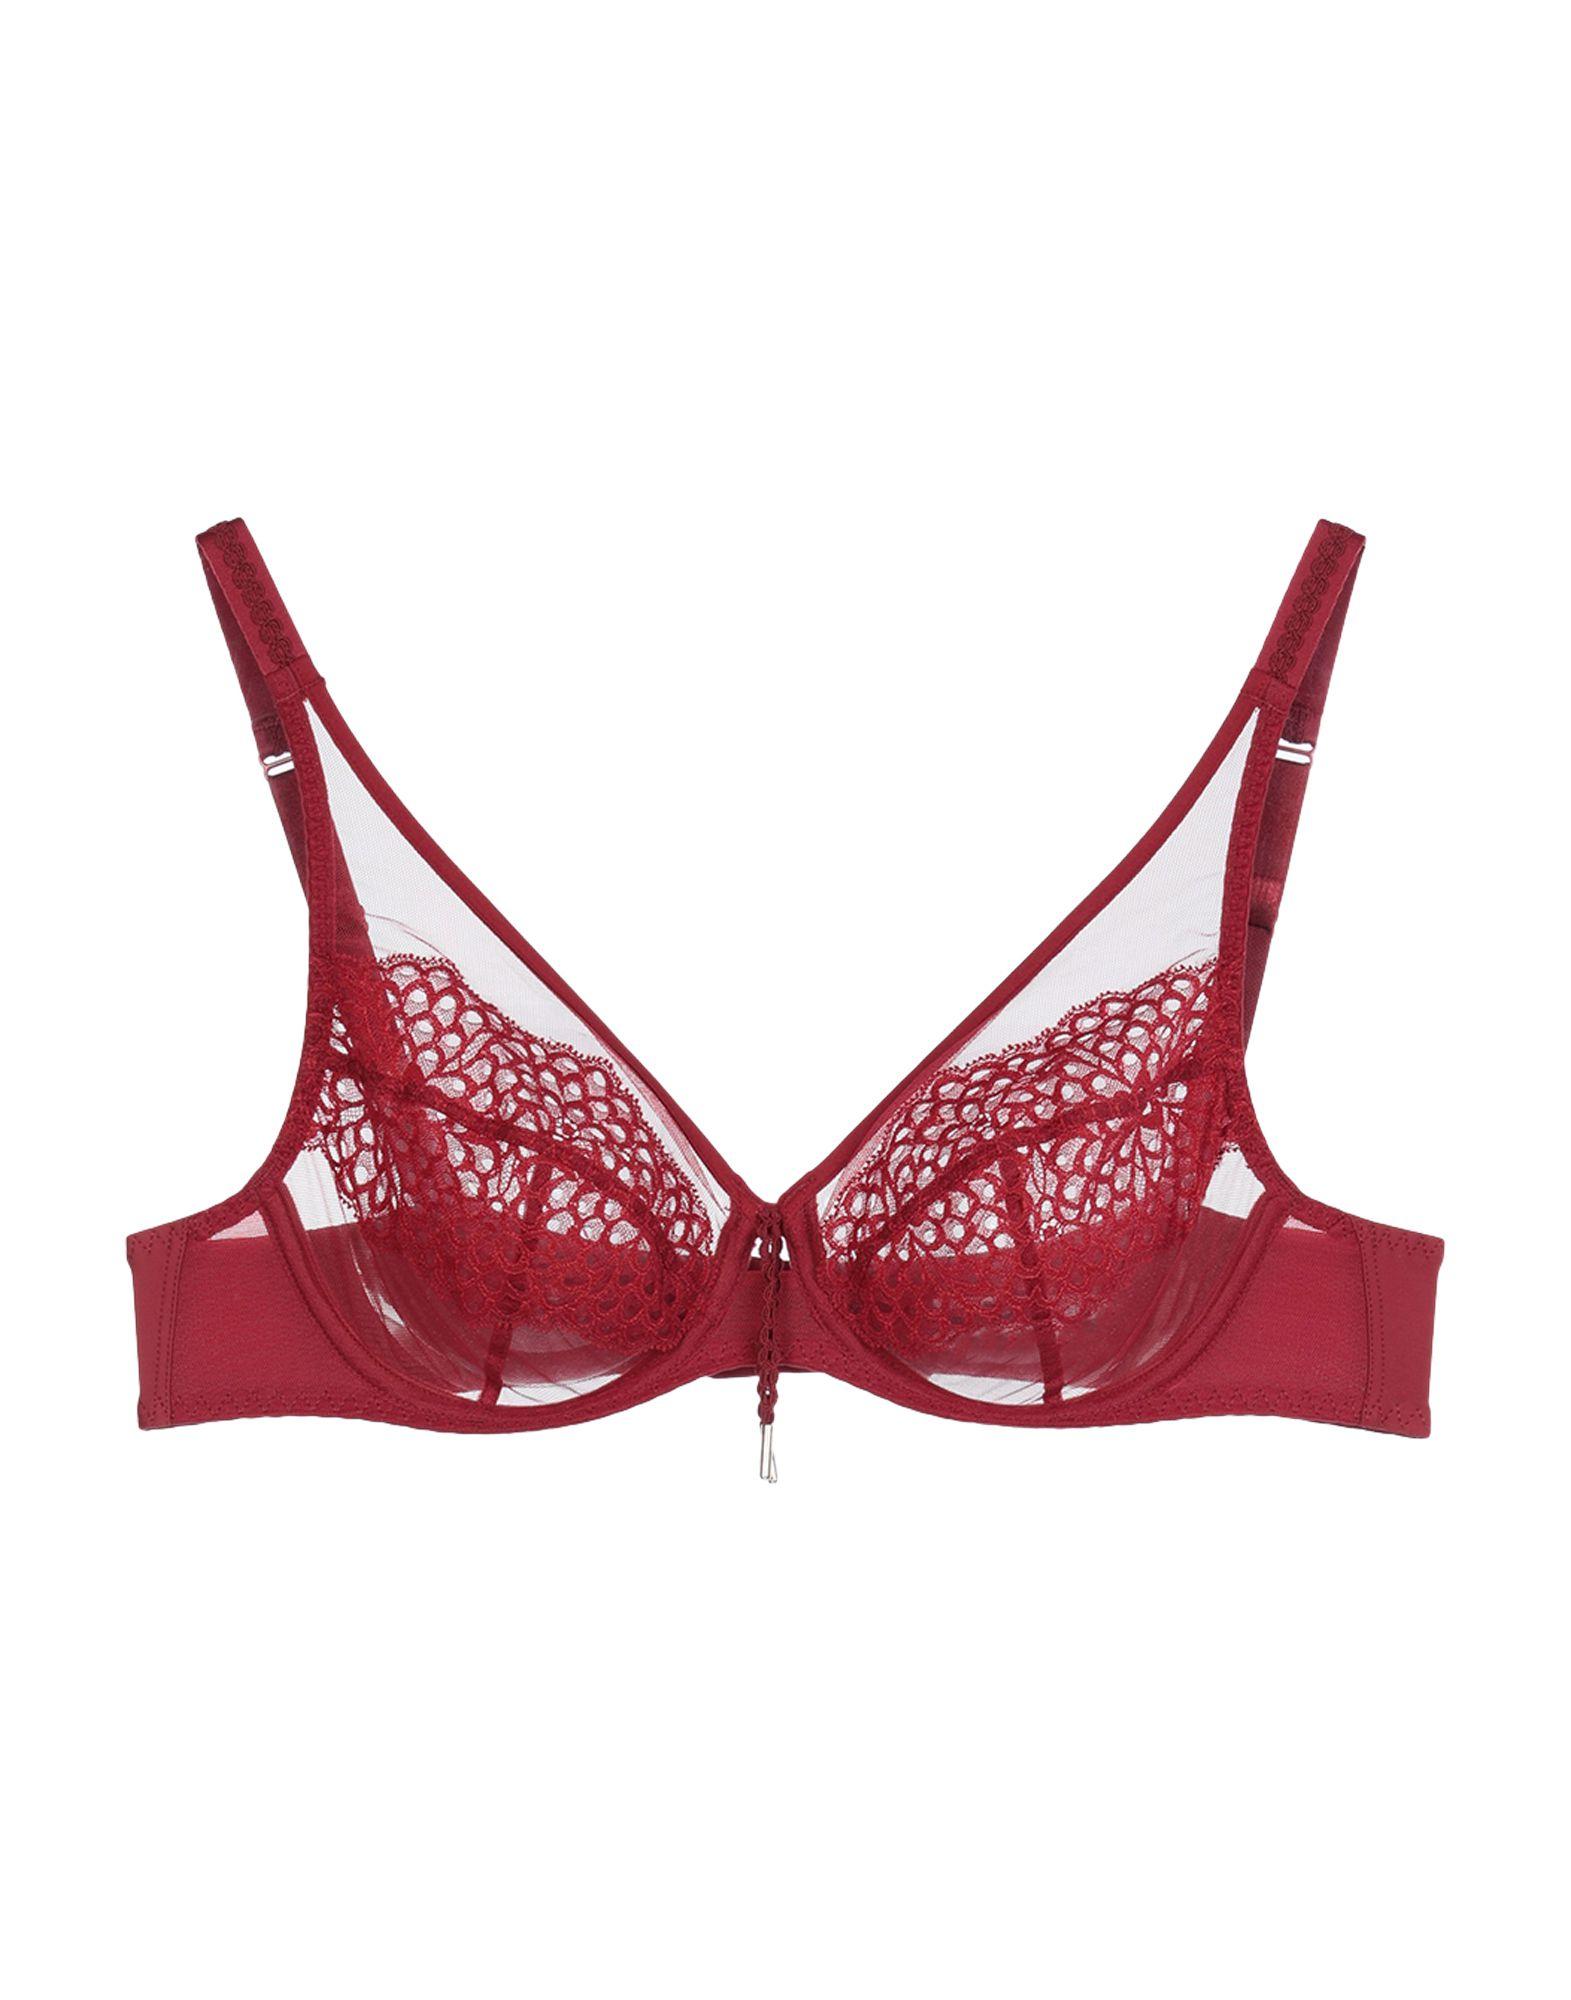 Maison Lejaby Lace Bra in Brick Red (Red) - Lyst